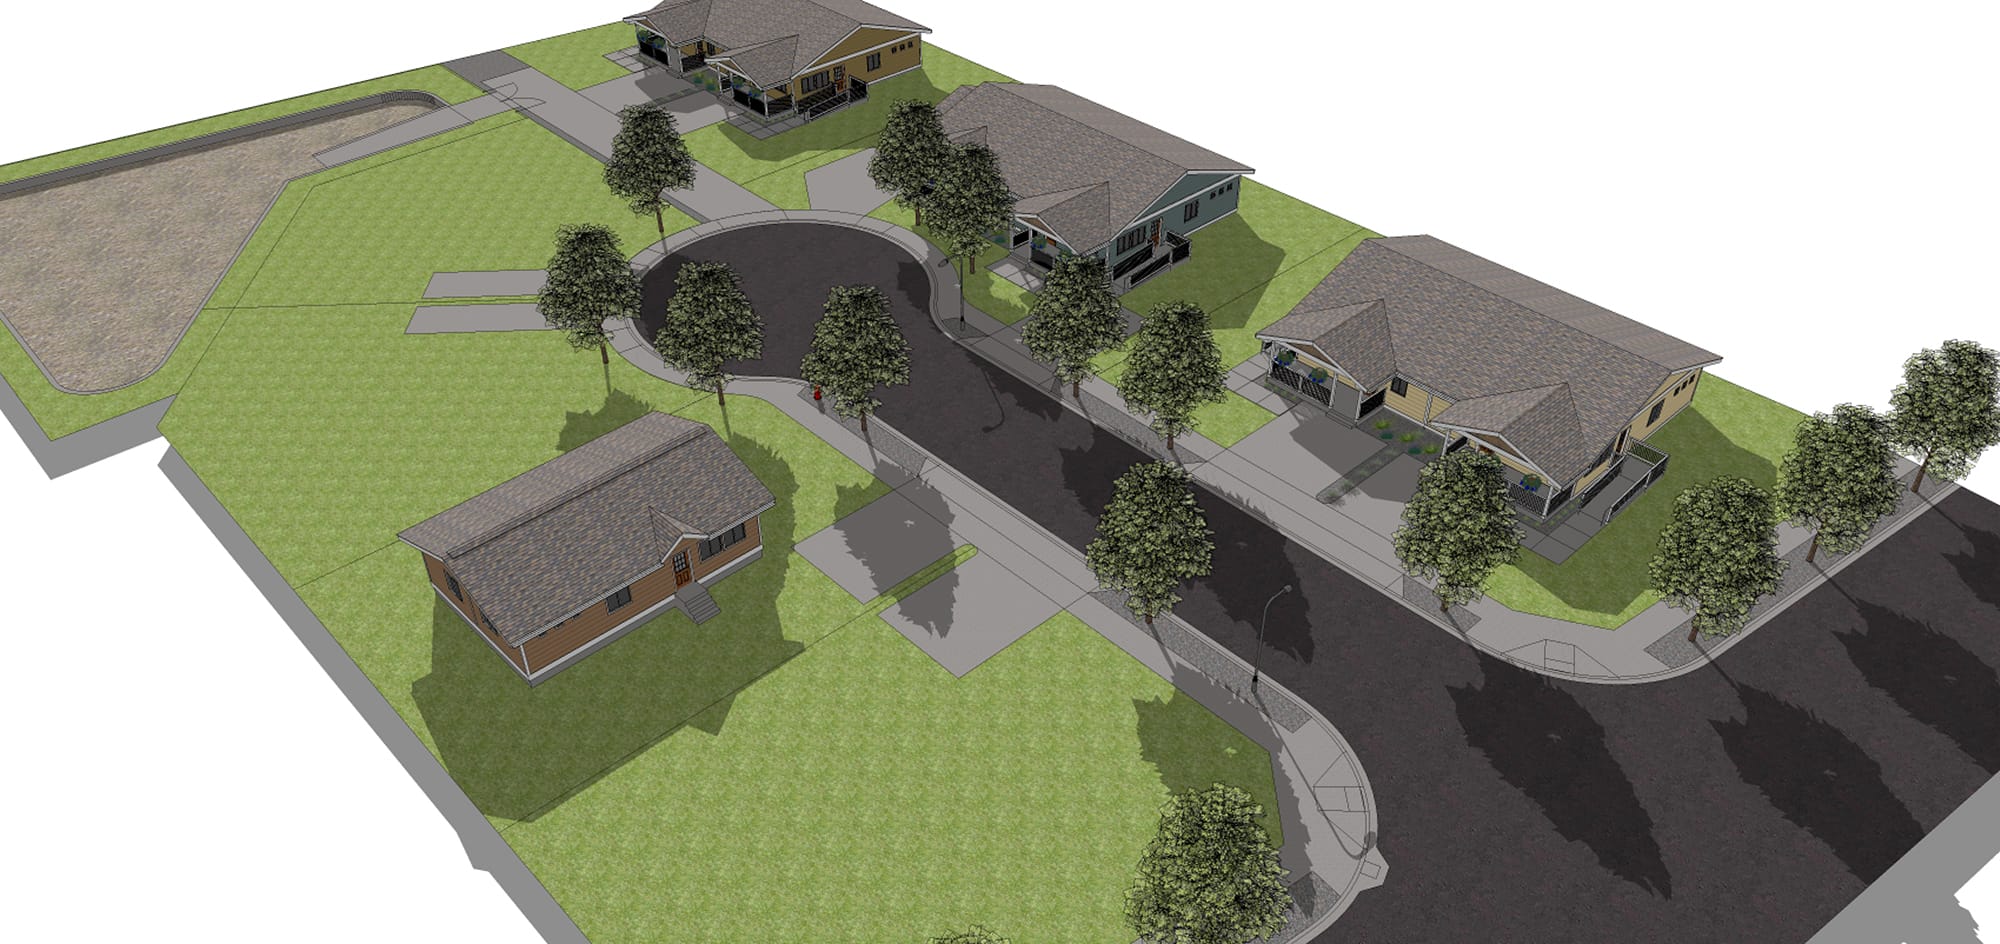 Evergreen Habitat for Humanity announced the proposed Middle Way Subdivision, a 10-house project in the Father Blanchet Park neighborhood.